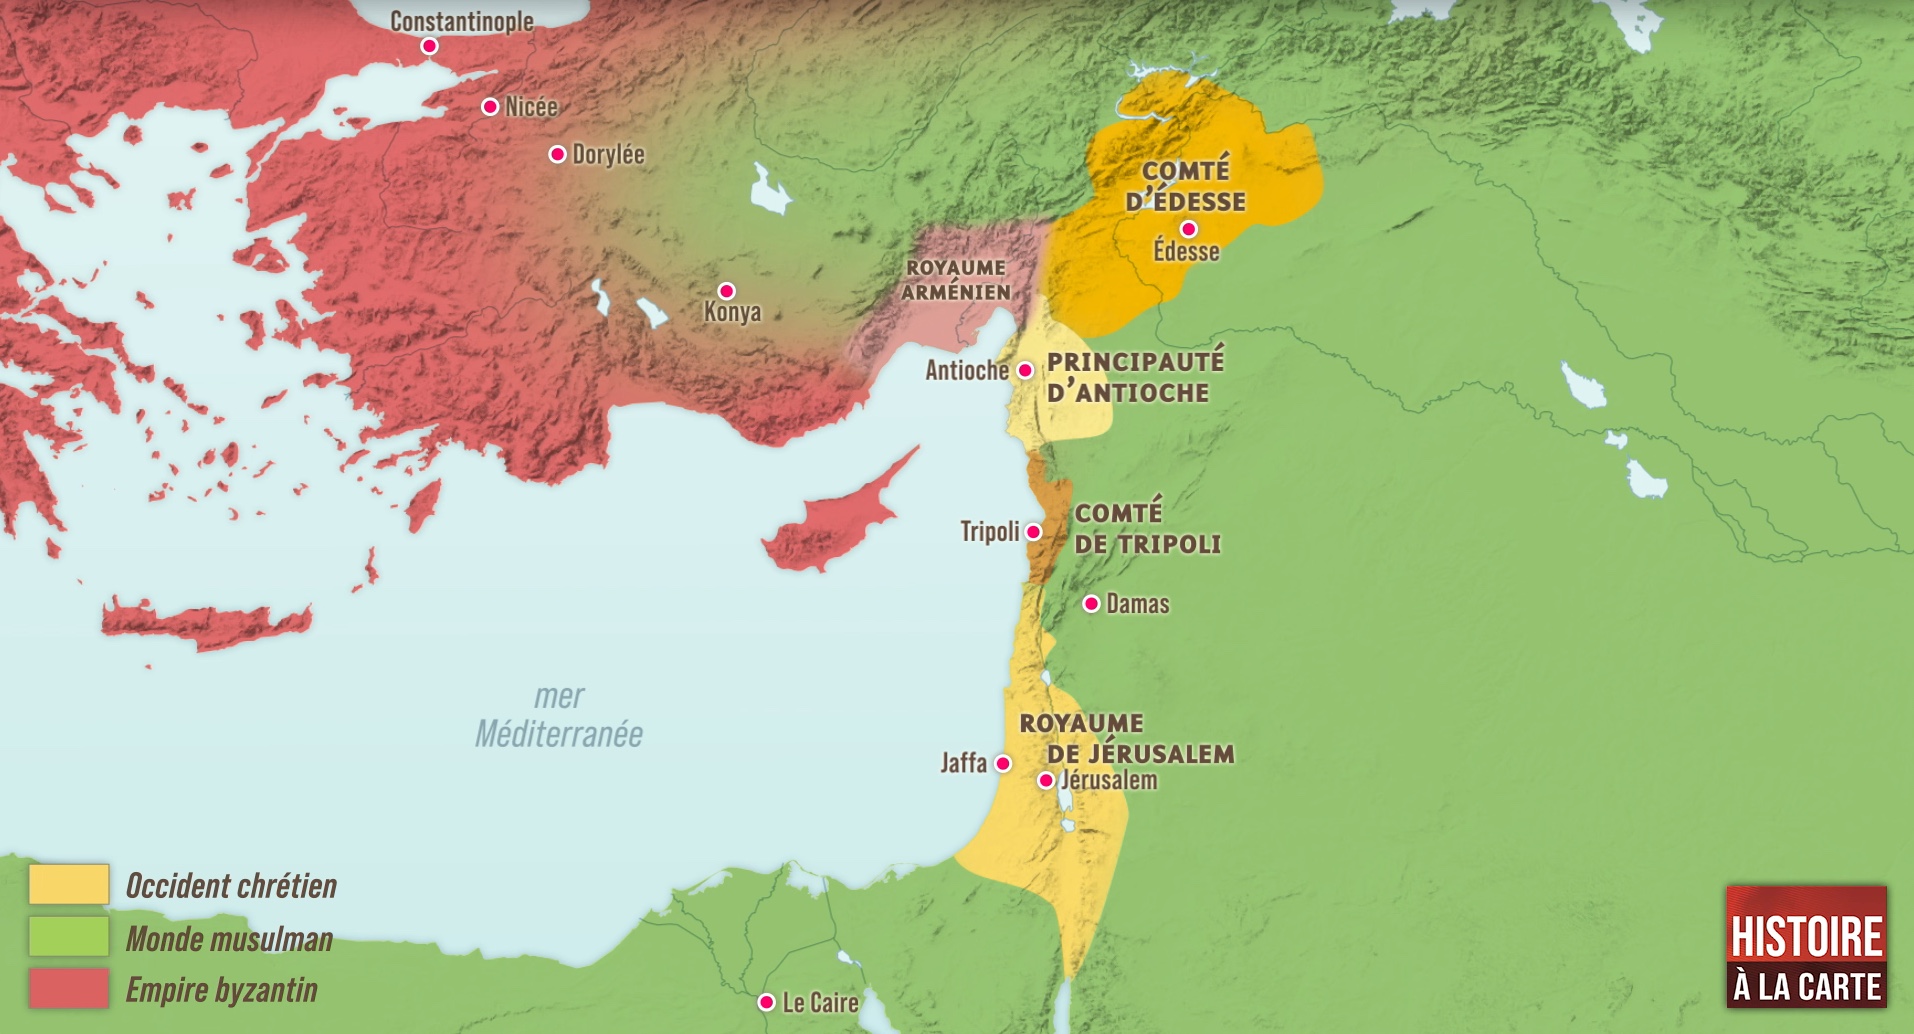 The foundation of the Crusader states